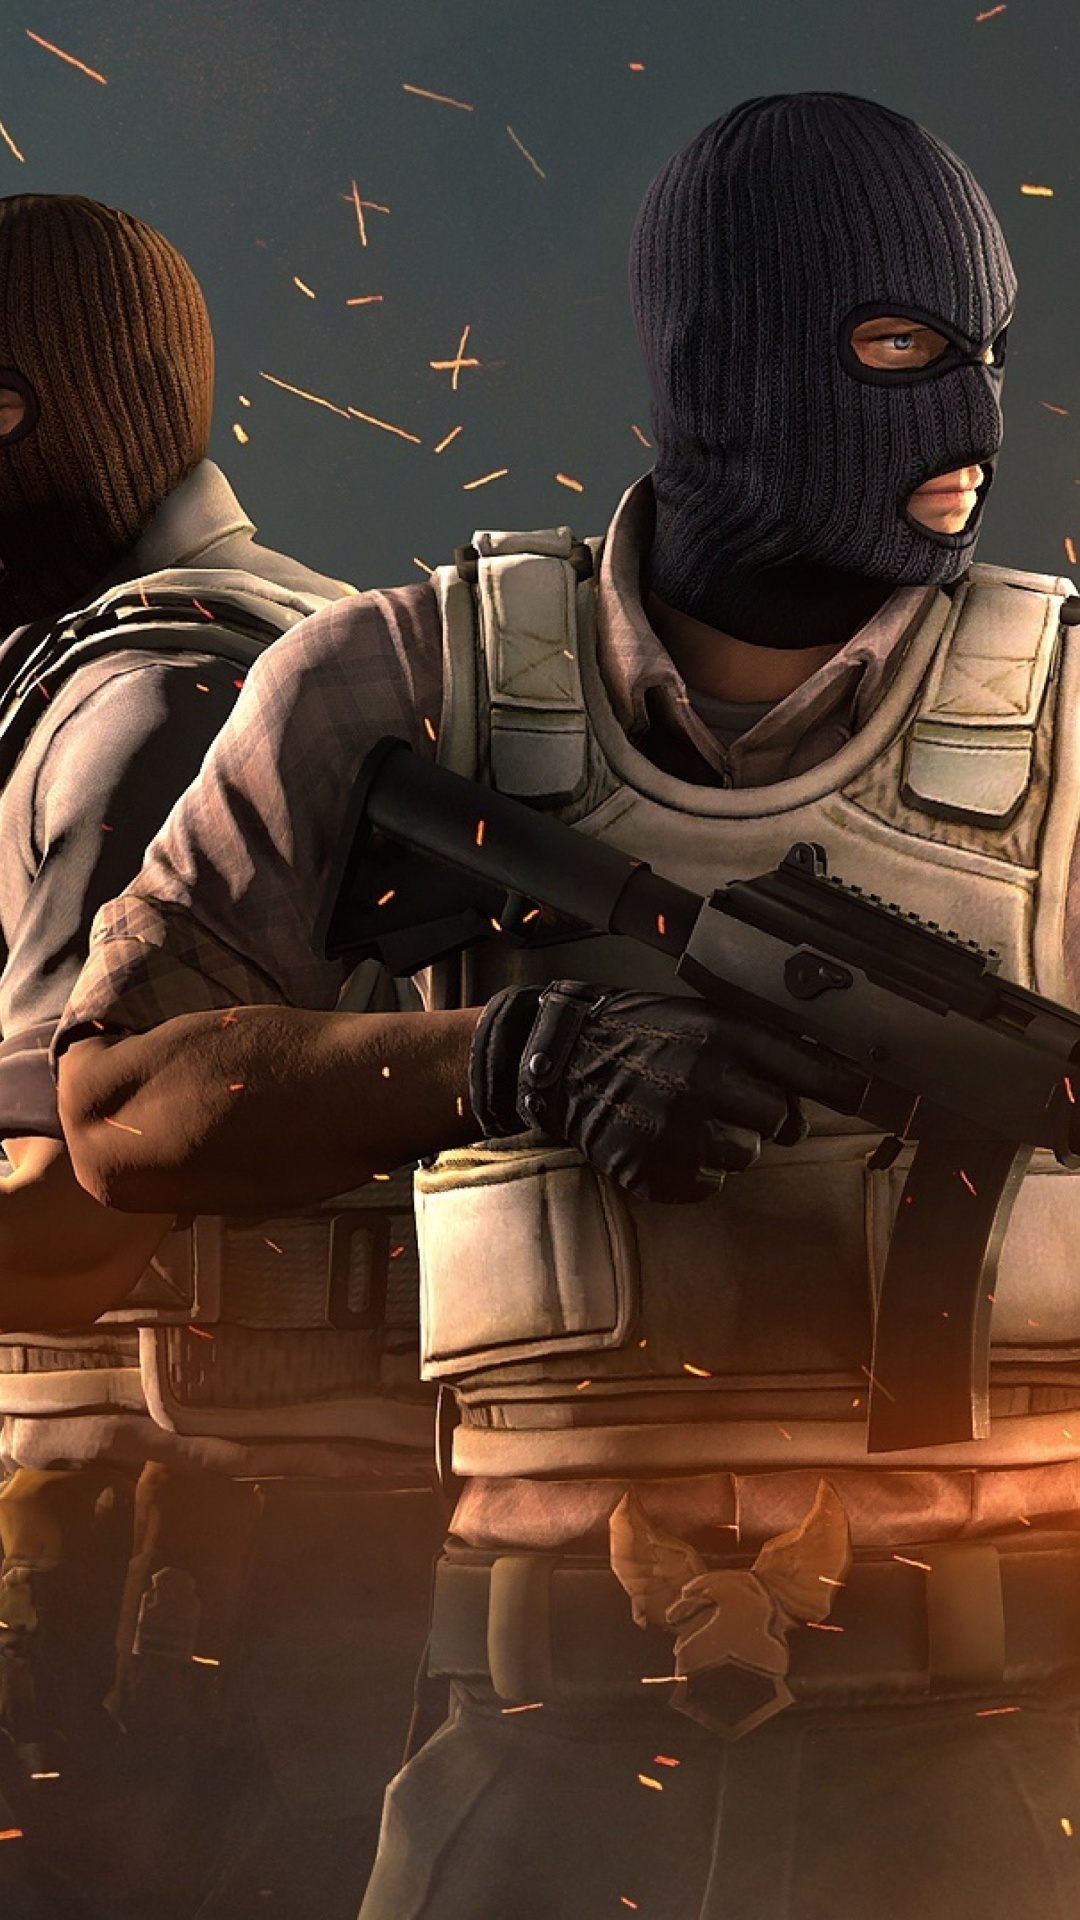 Download wallpaper: Counter Strike: Global Offensive 1080x1920